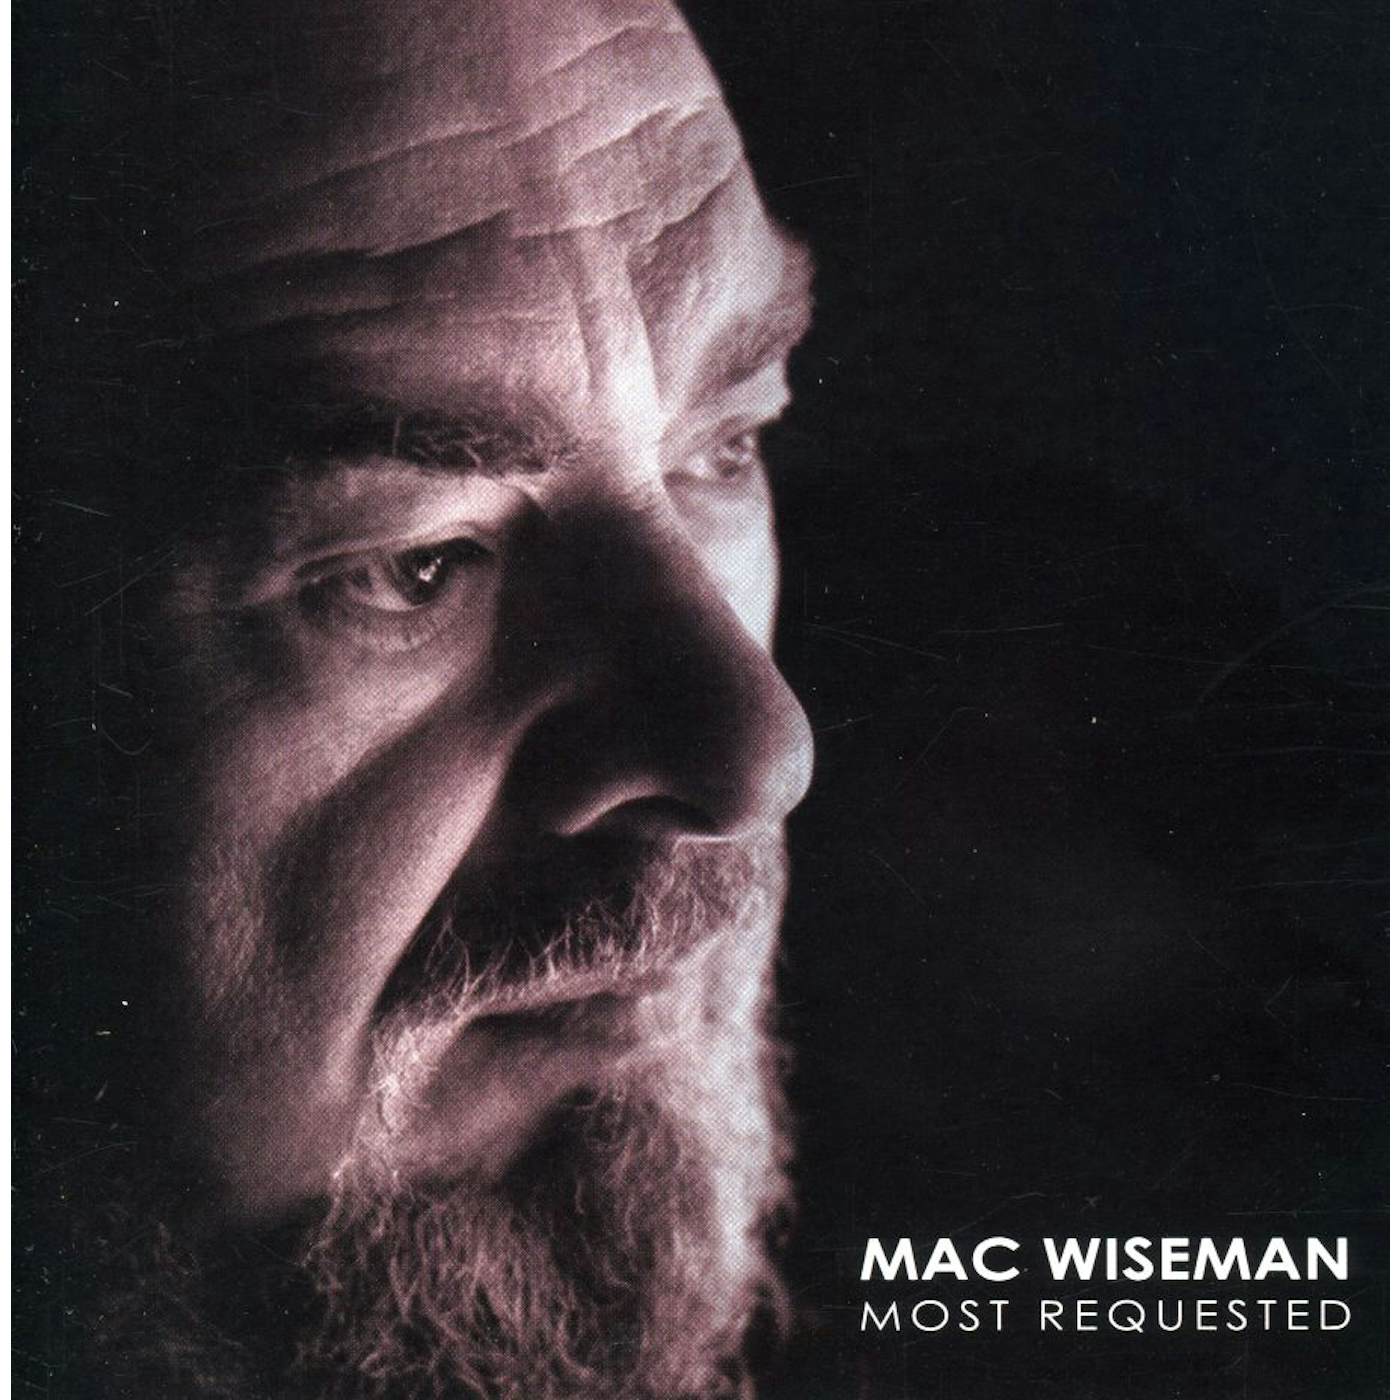 Mac Wiseman MOST REQUESTED CD